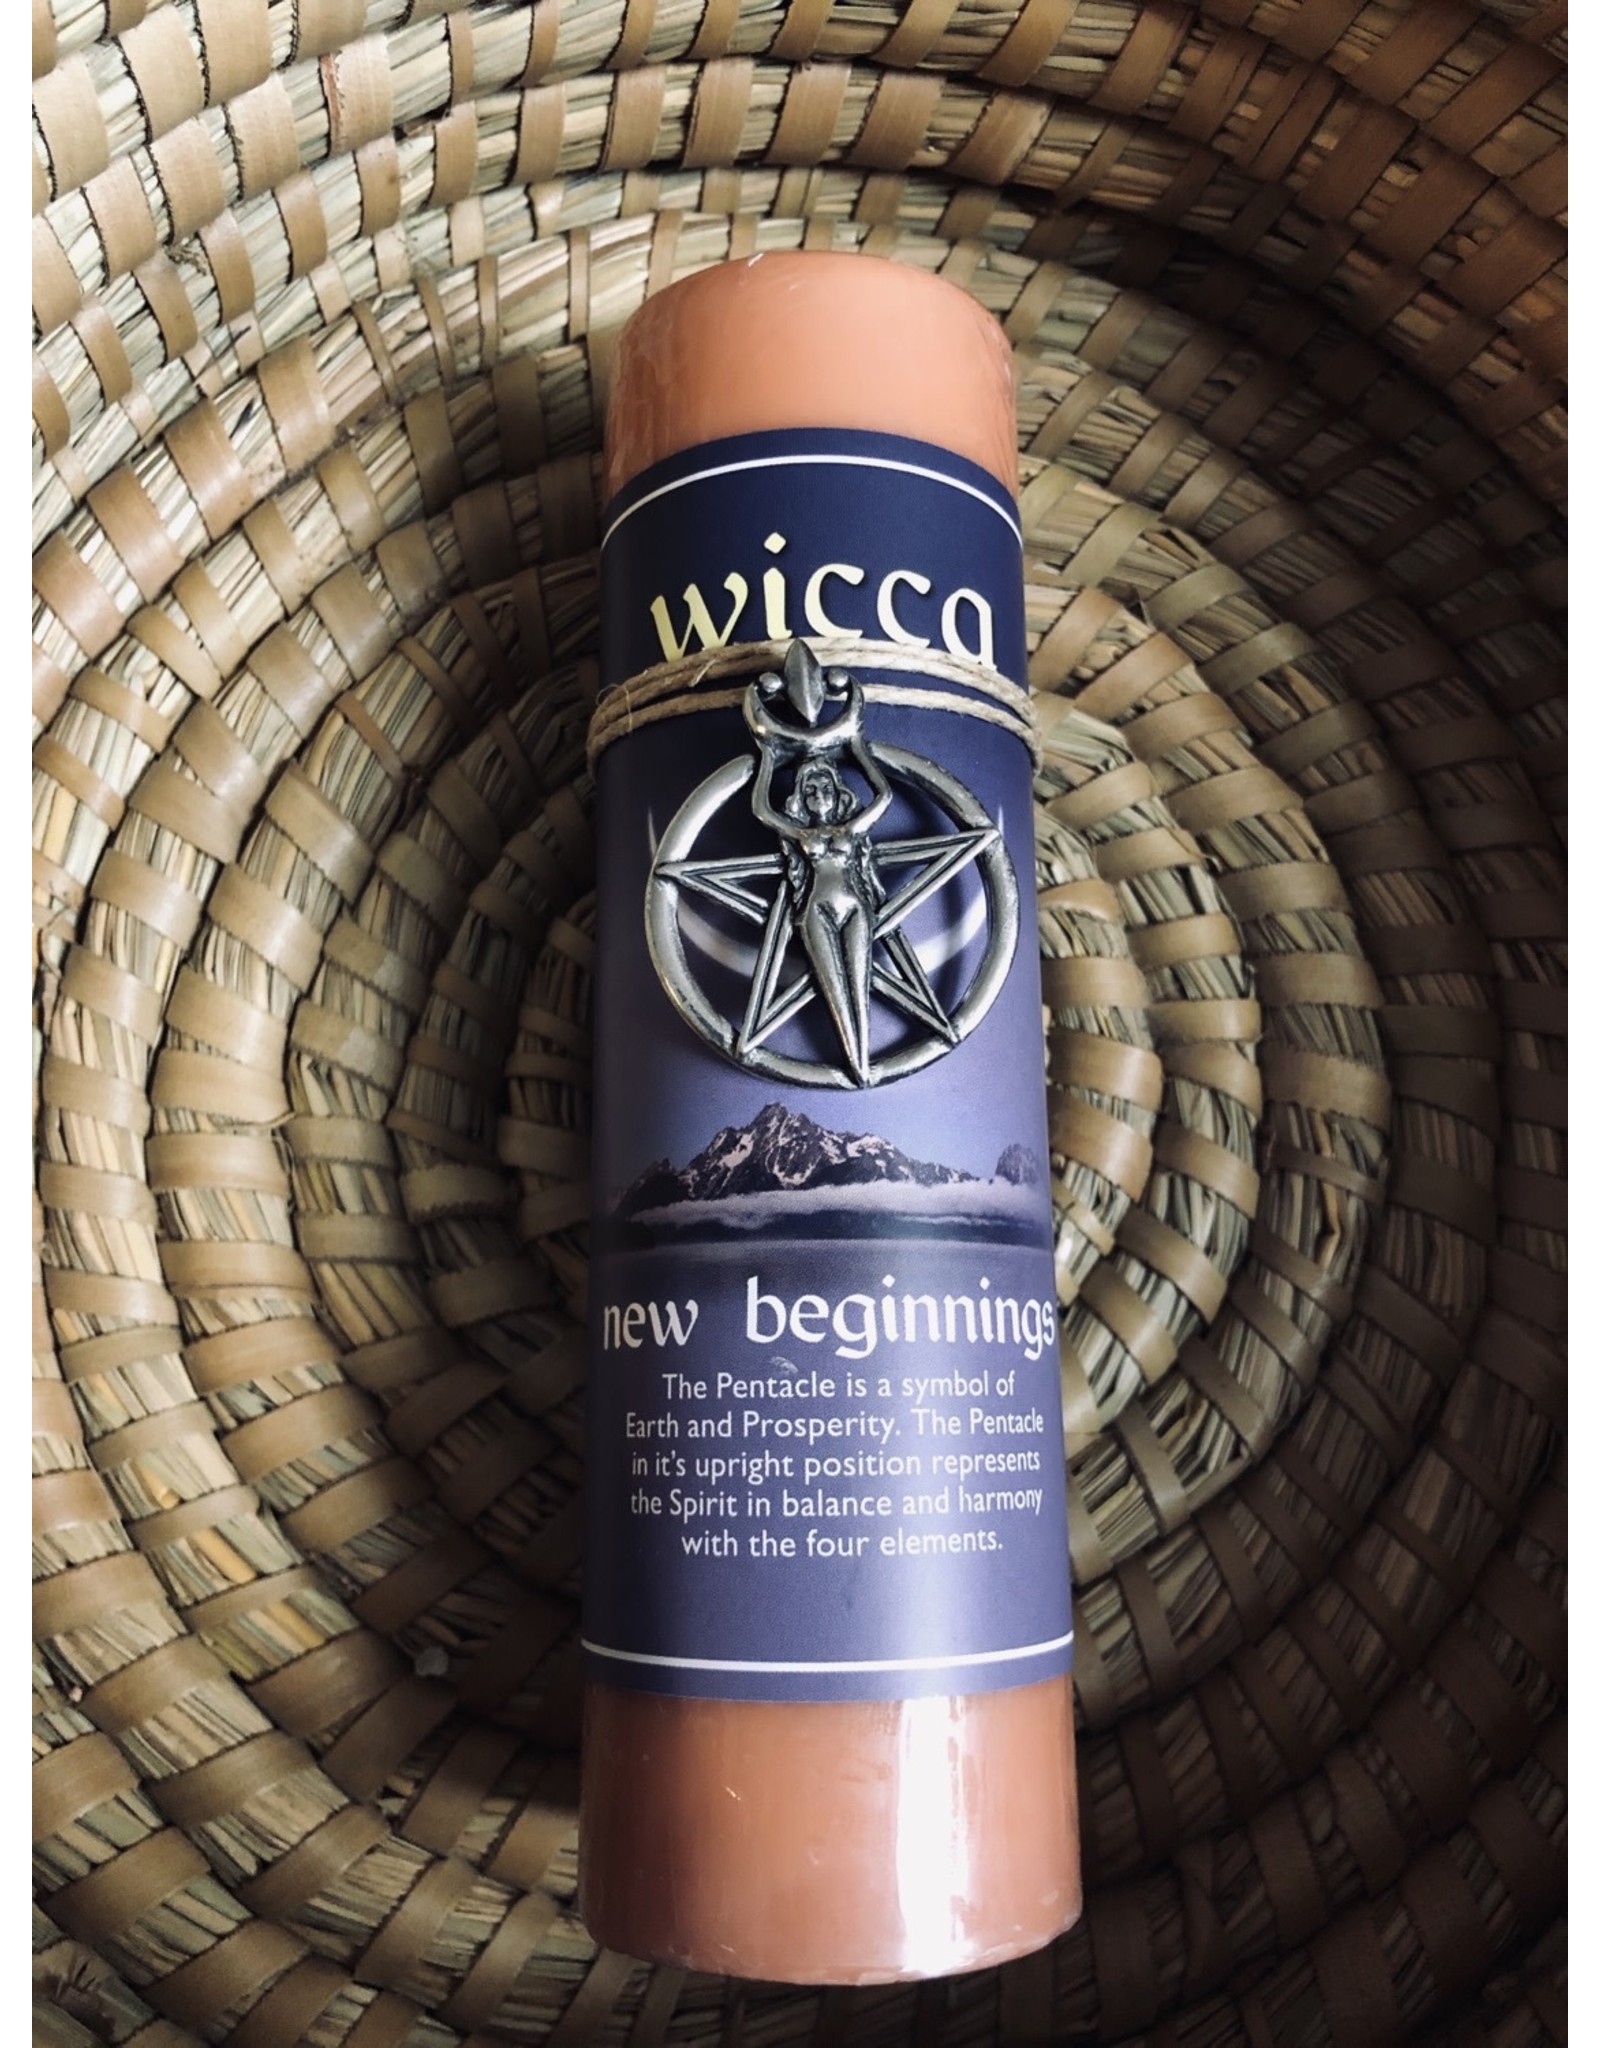 Wicca Intention Candle